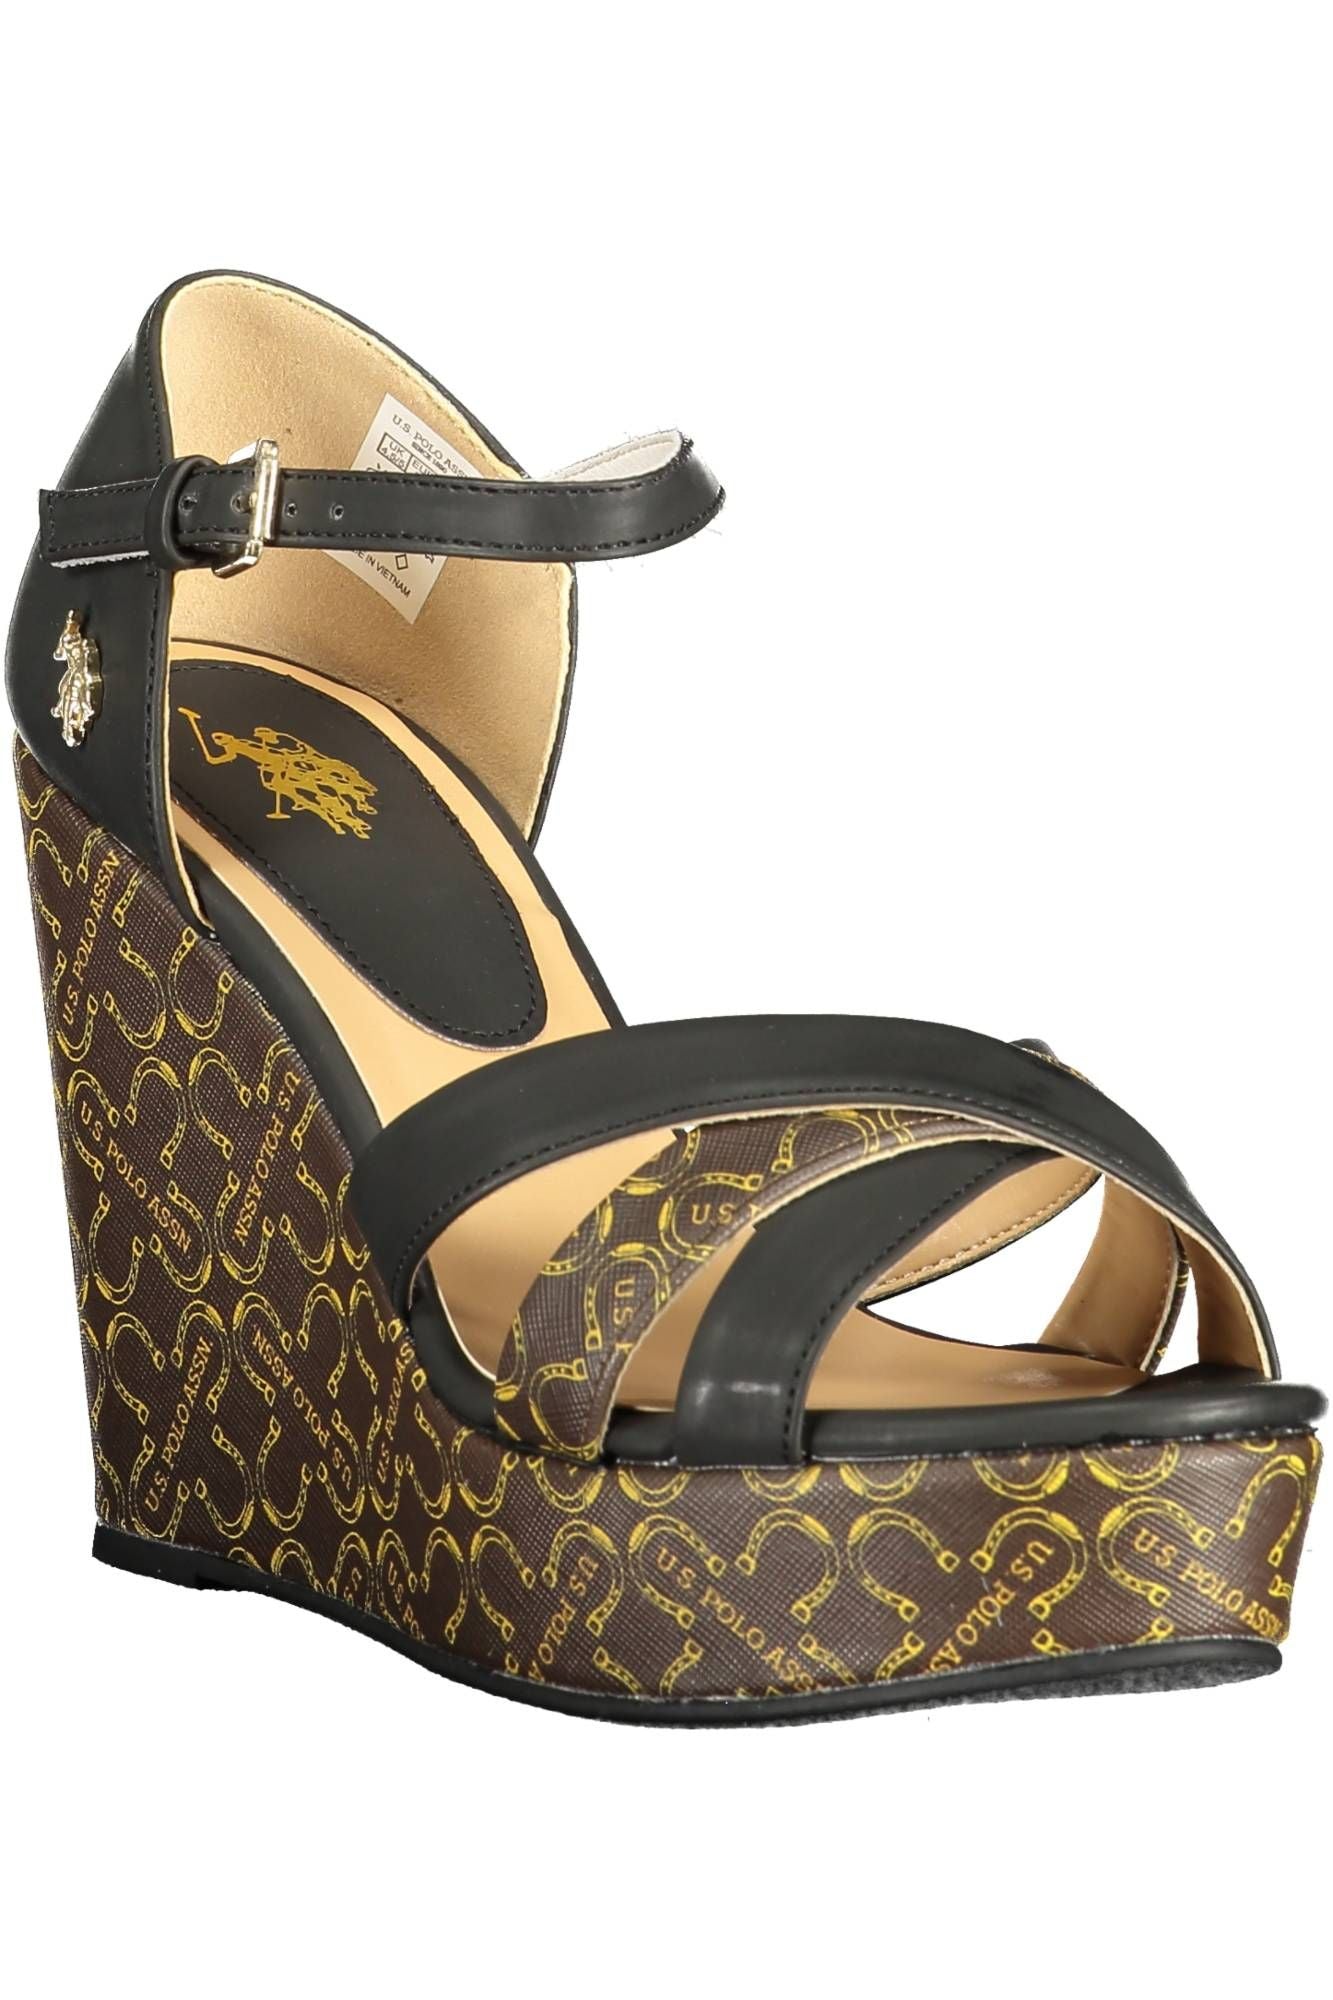 U.S. POLO ASSN. Chic Ankle-Strap Wedge Sandals